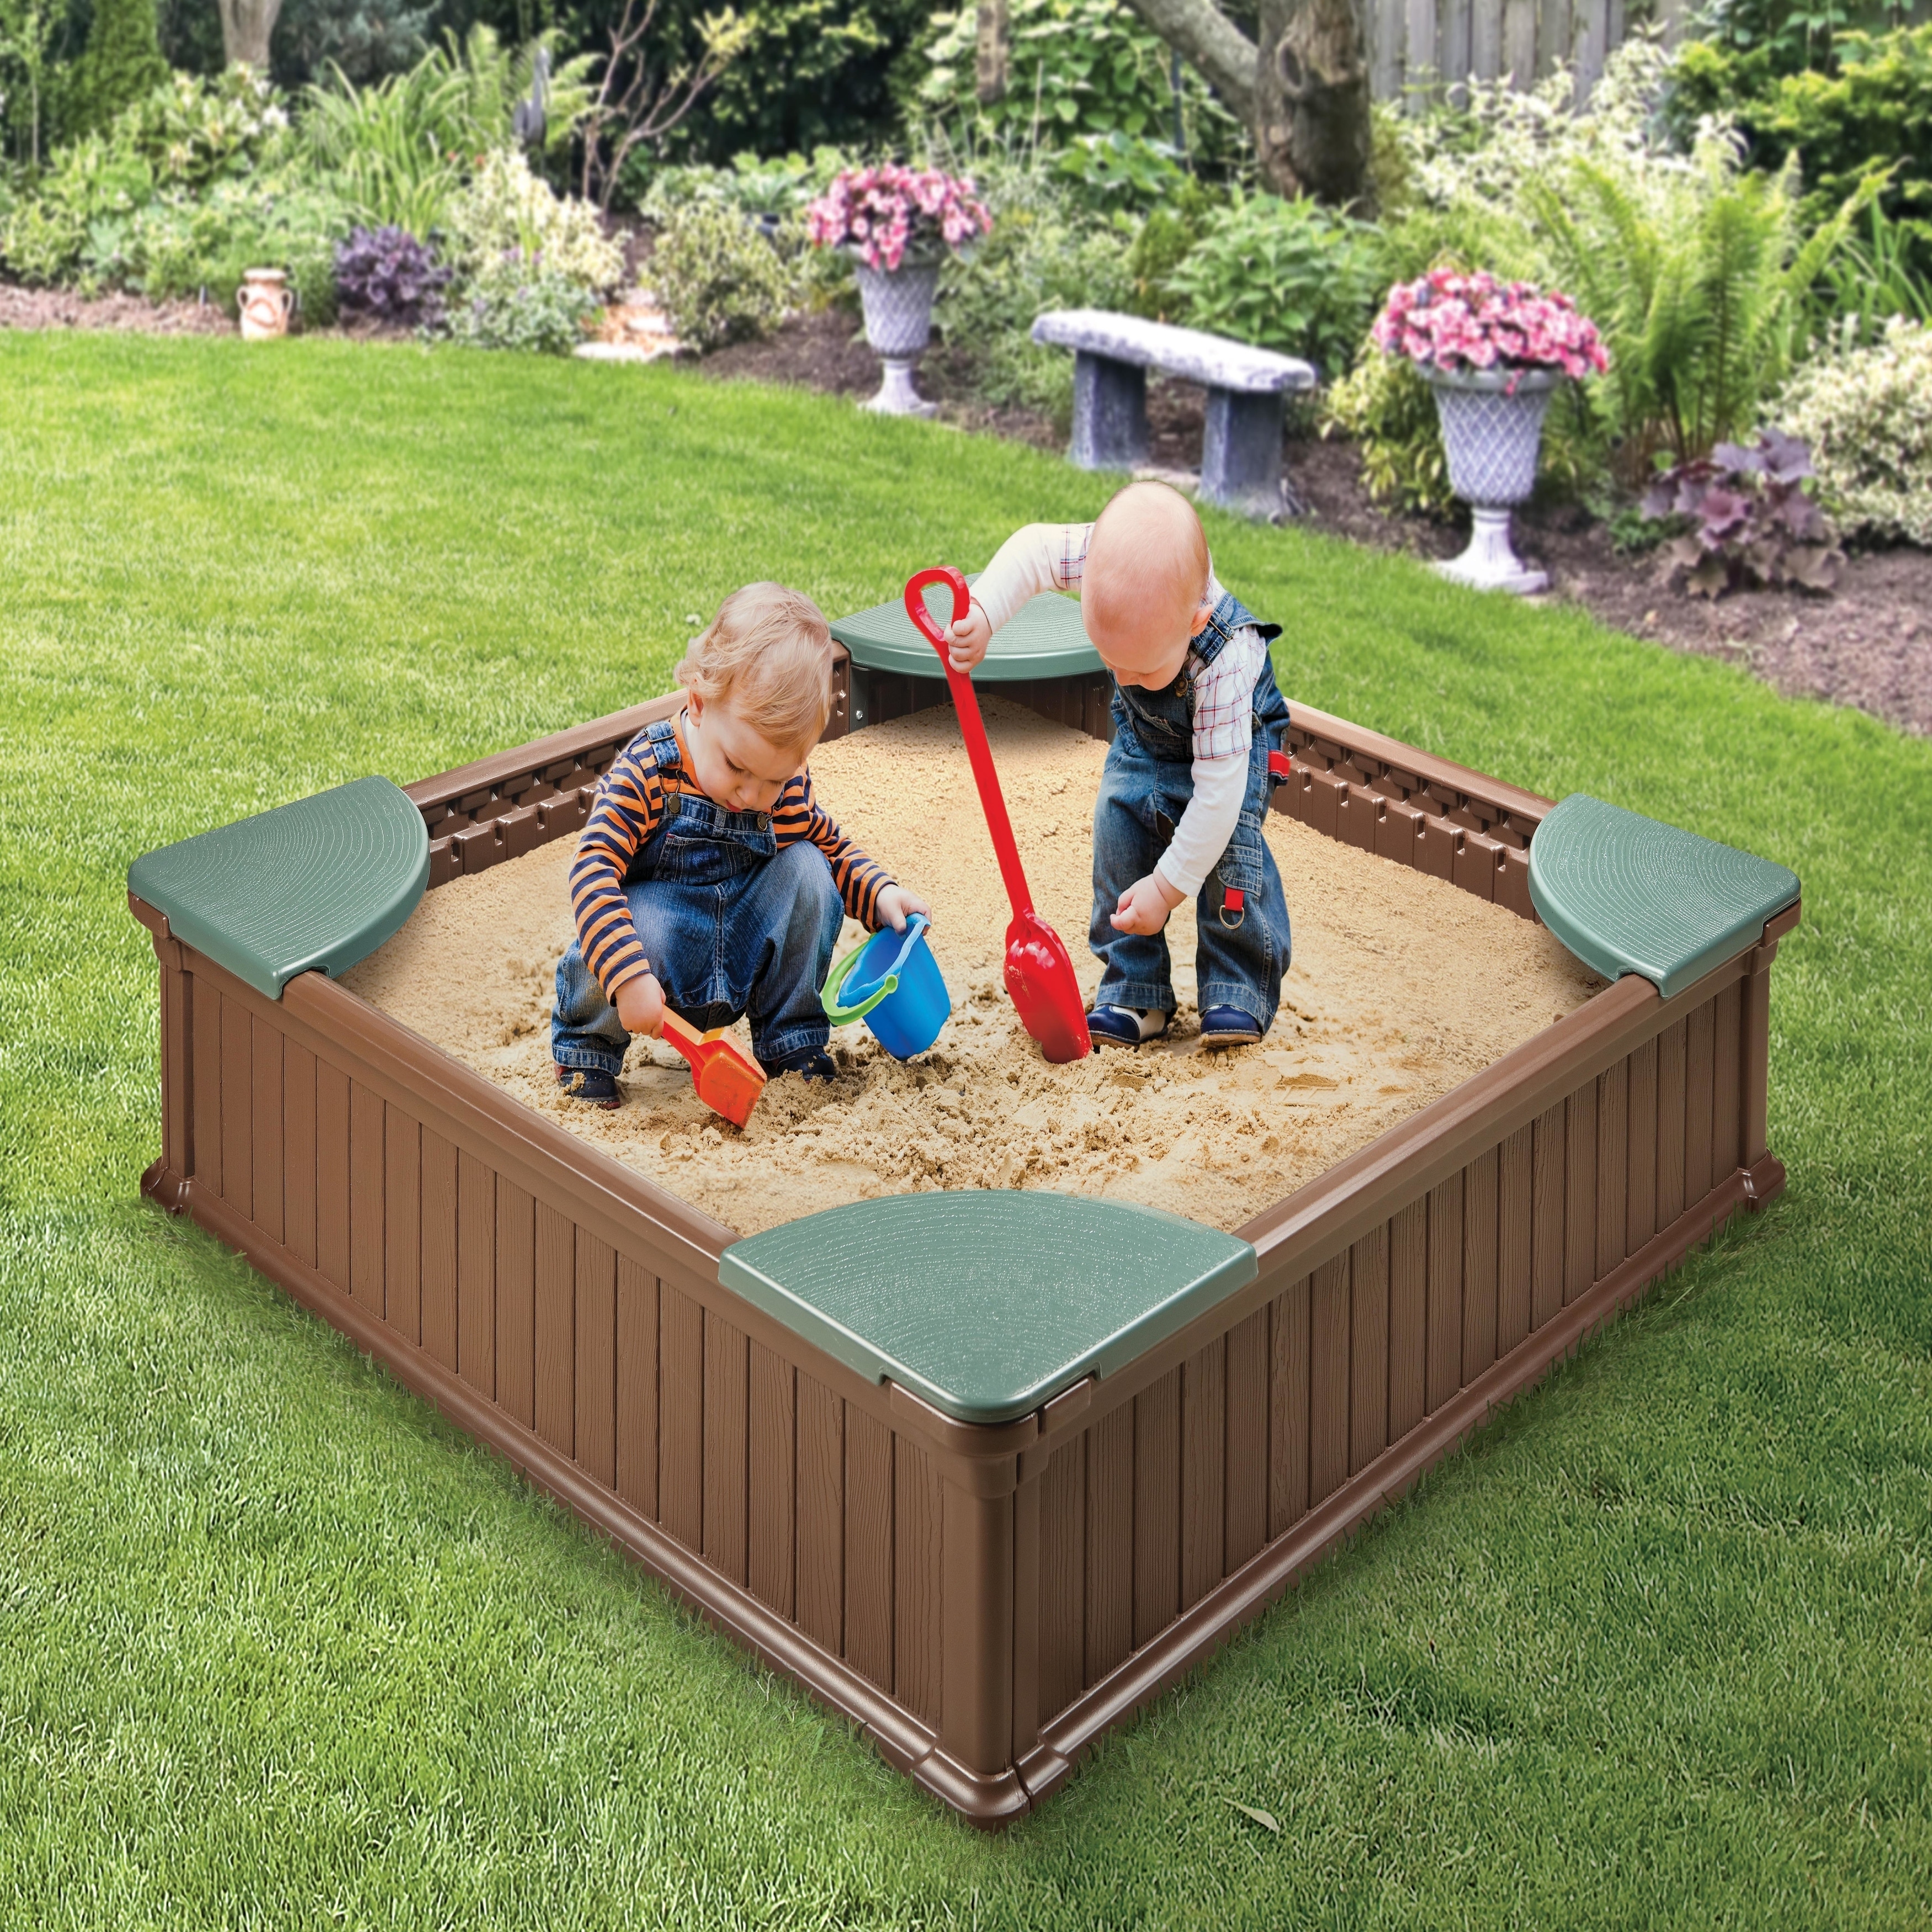 brittany folkins recommends 4 girls one sandbox pic